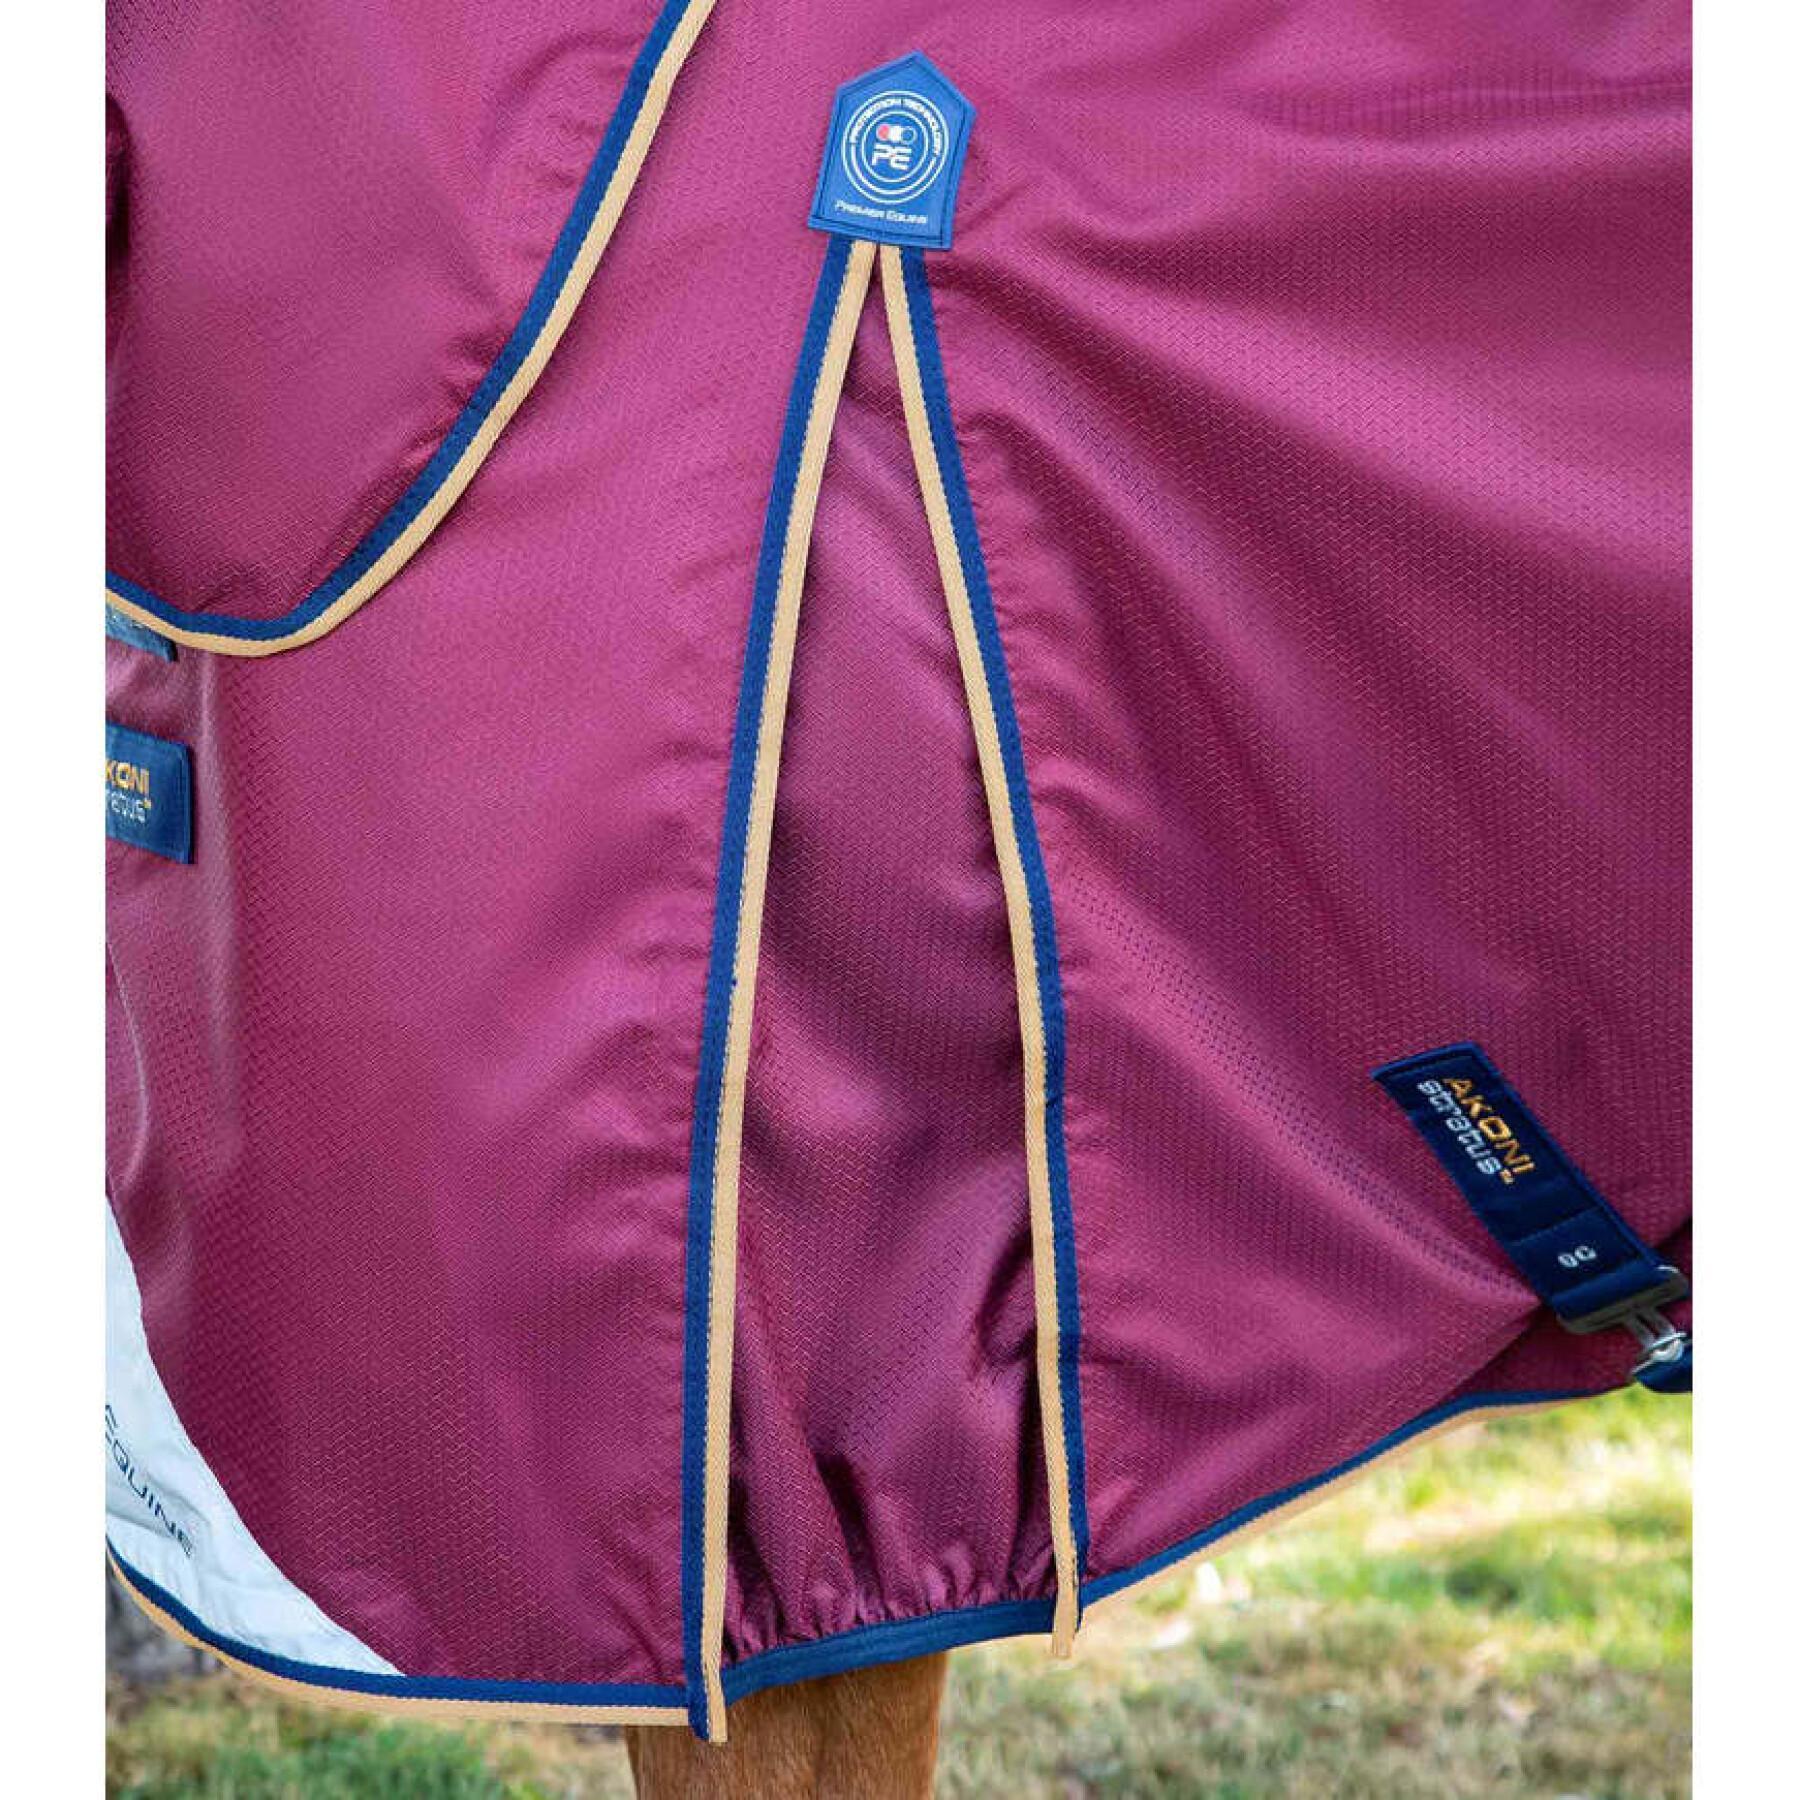 Outdoor horse blanket with neck cover Premier Equine Akoni Stratus 0g